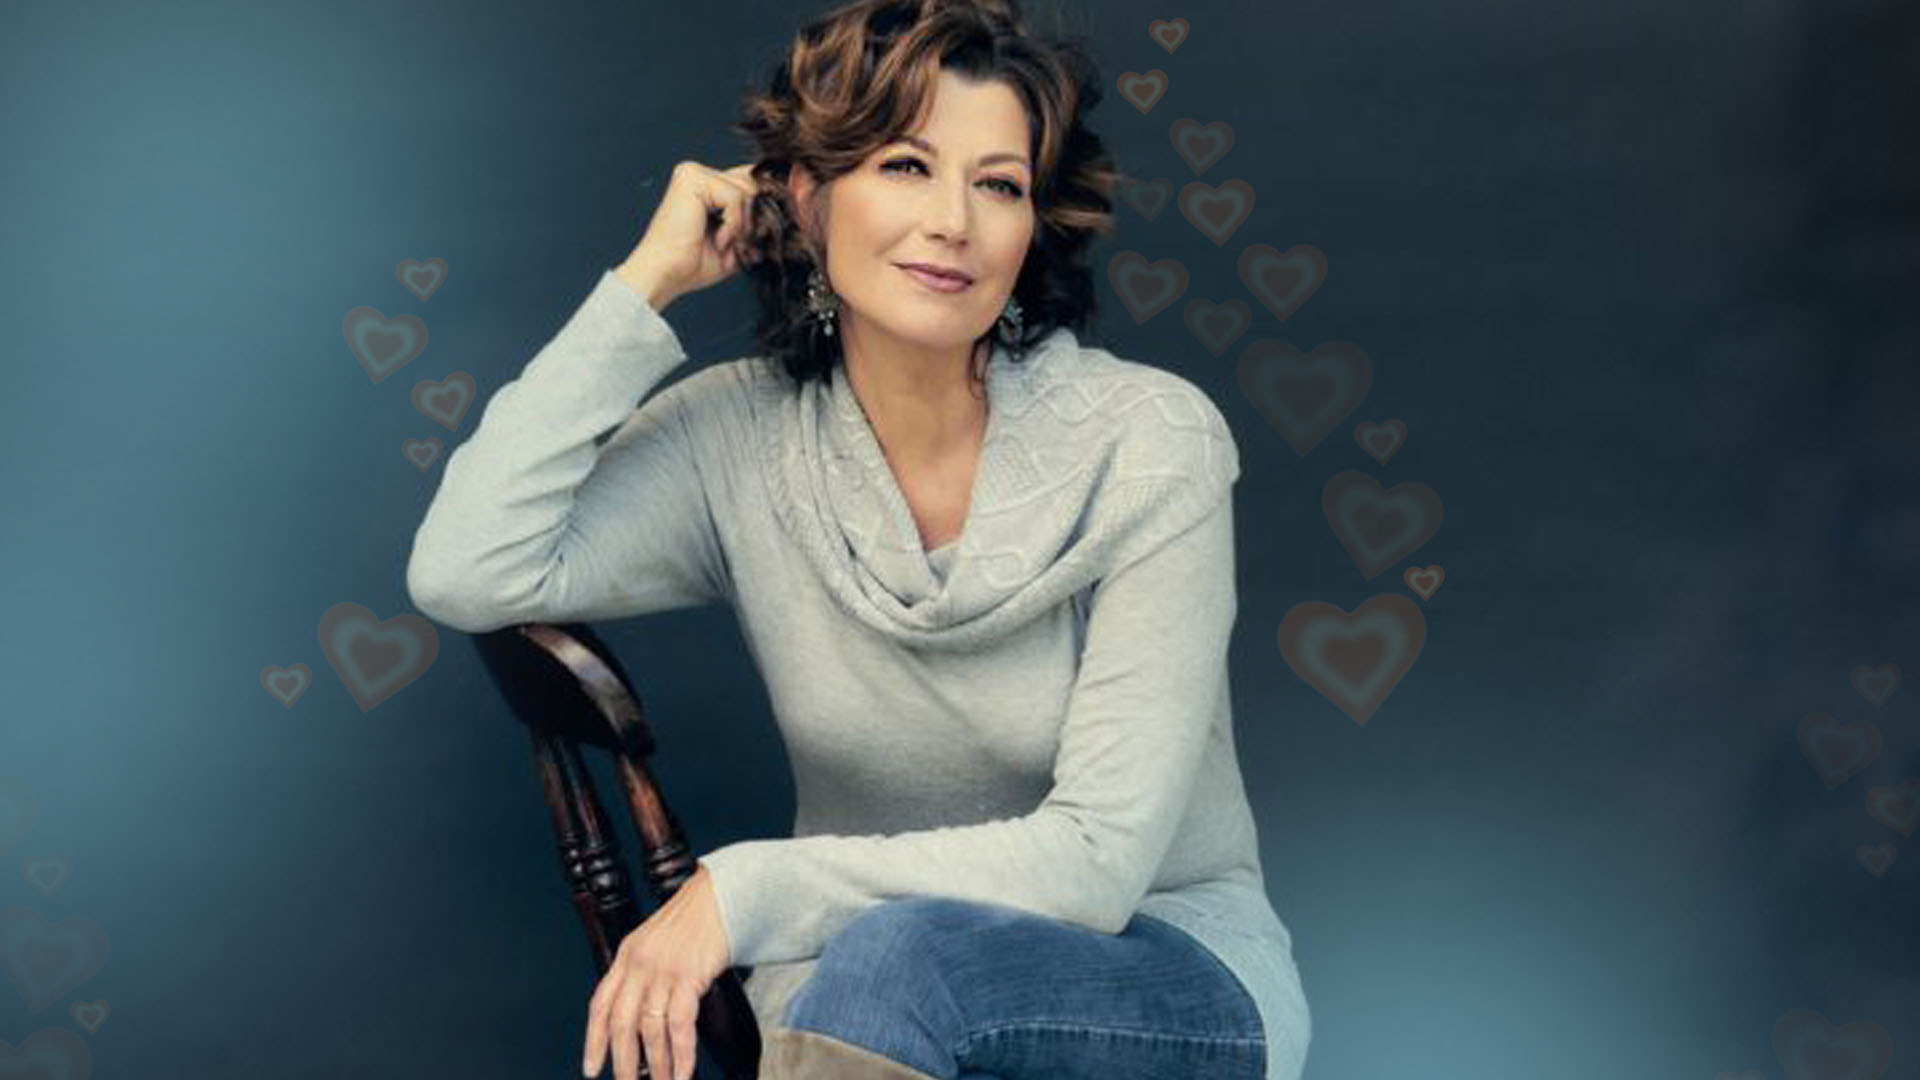 Amy Grant Covers "Put a Little Love in Your Heart"